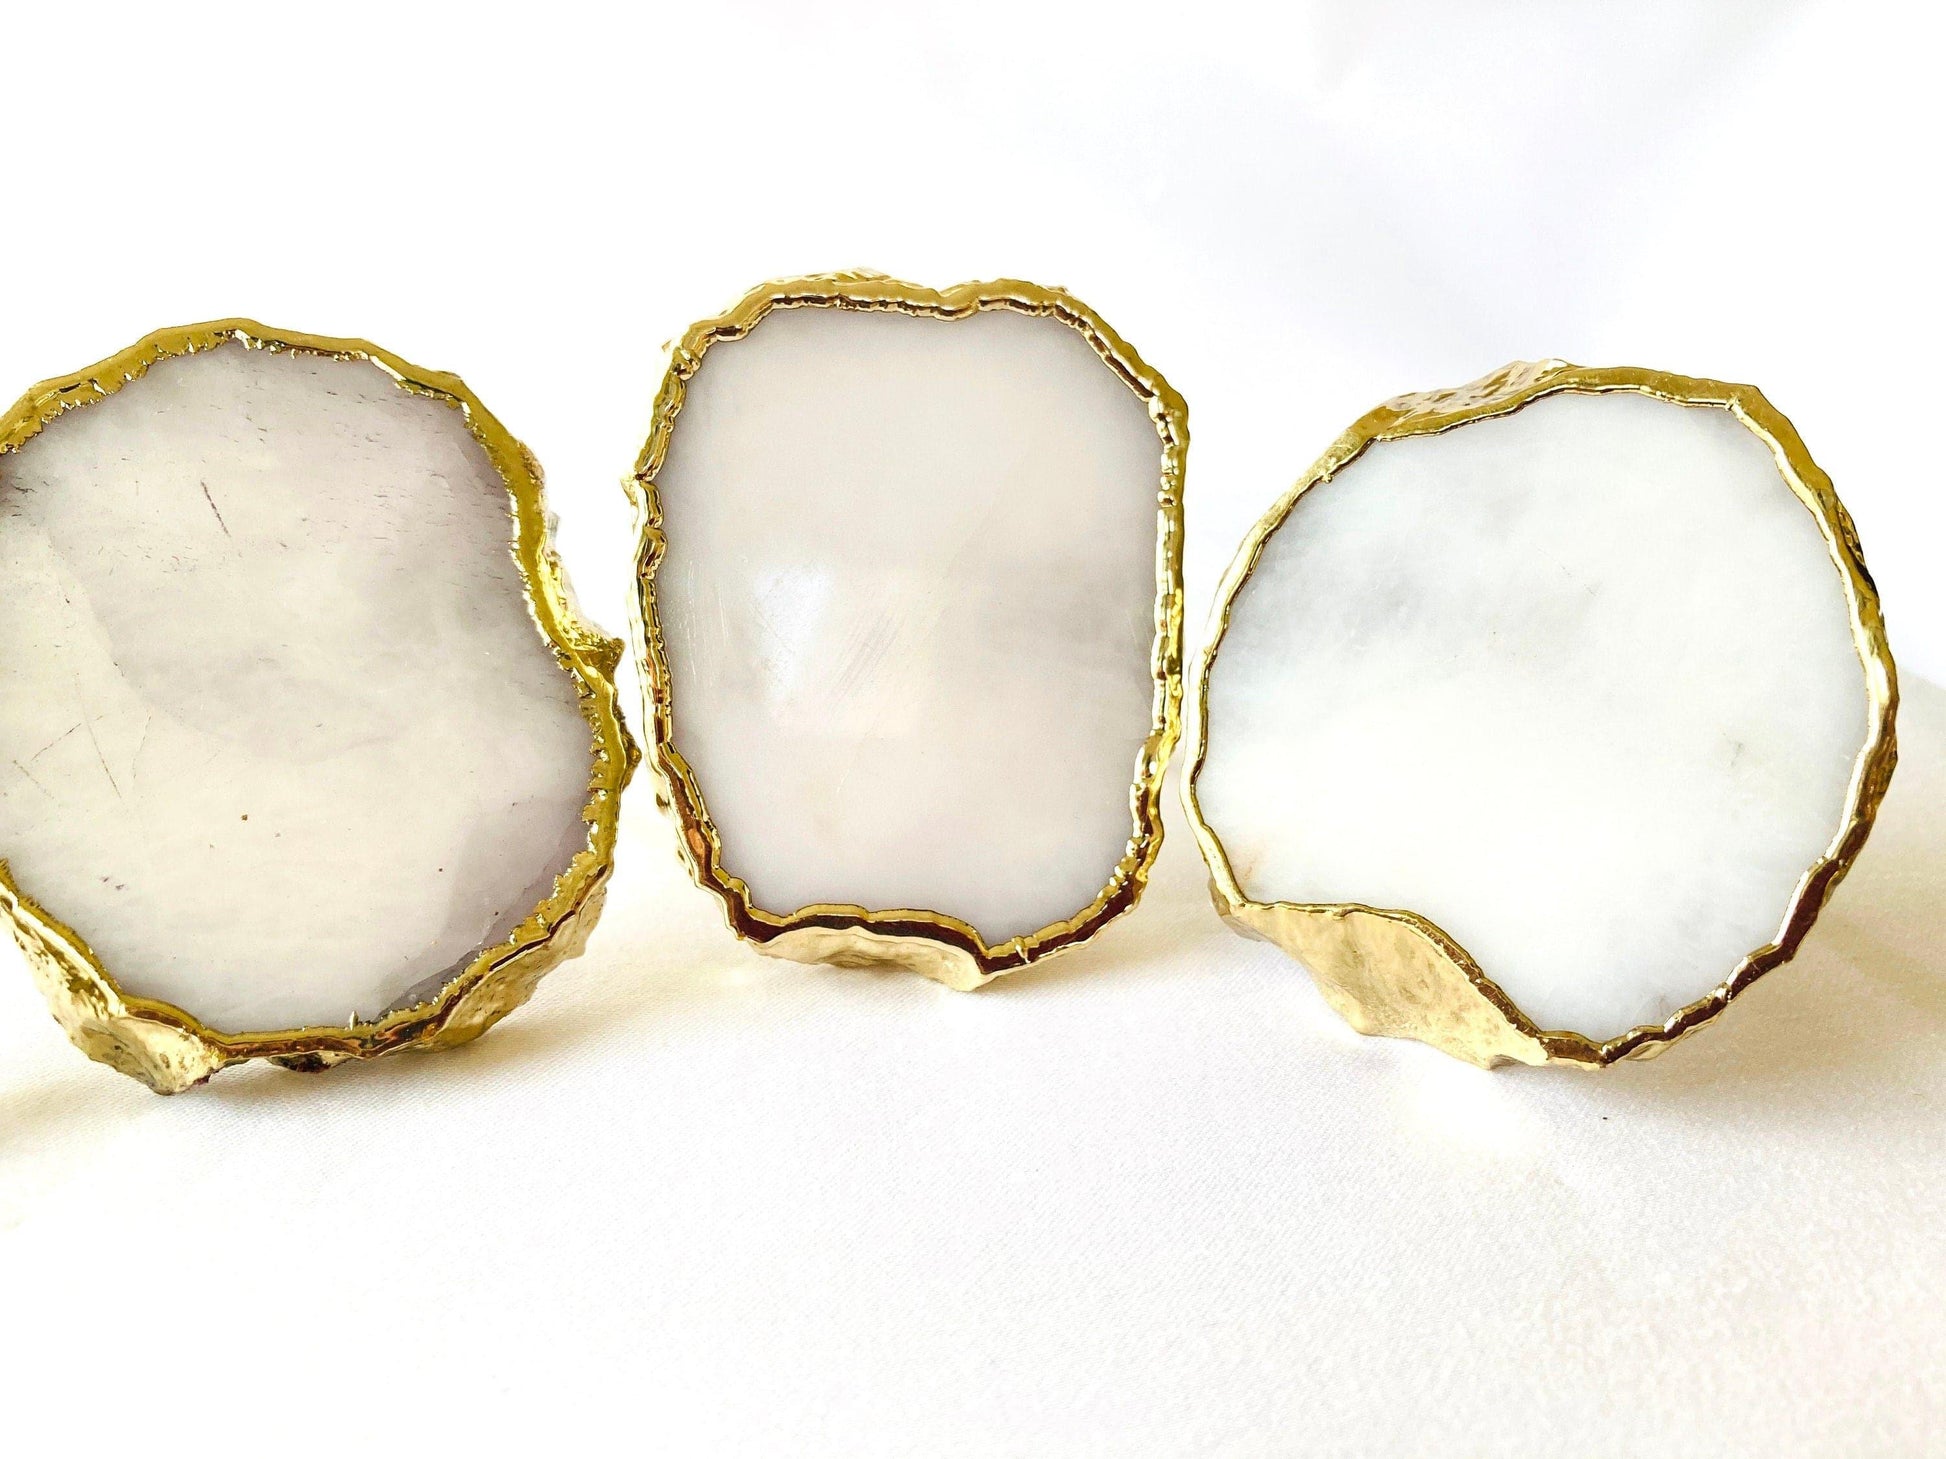 Set of 4 Hand Rounded White Agate Napkin Rings - MAIA HOMES